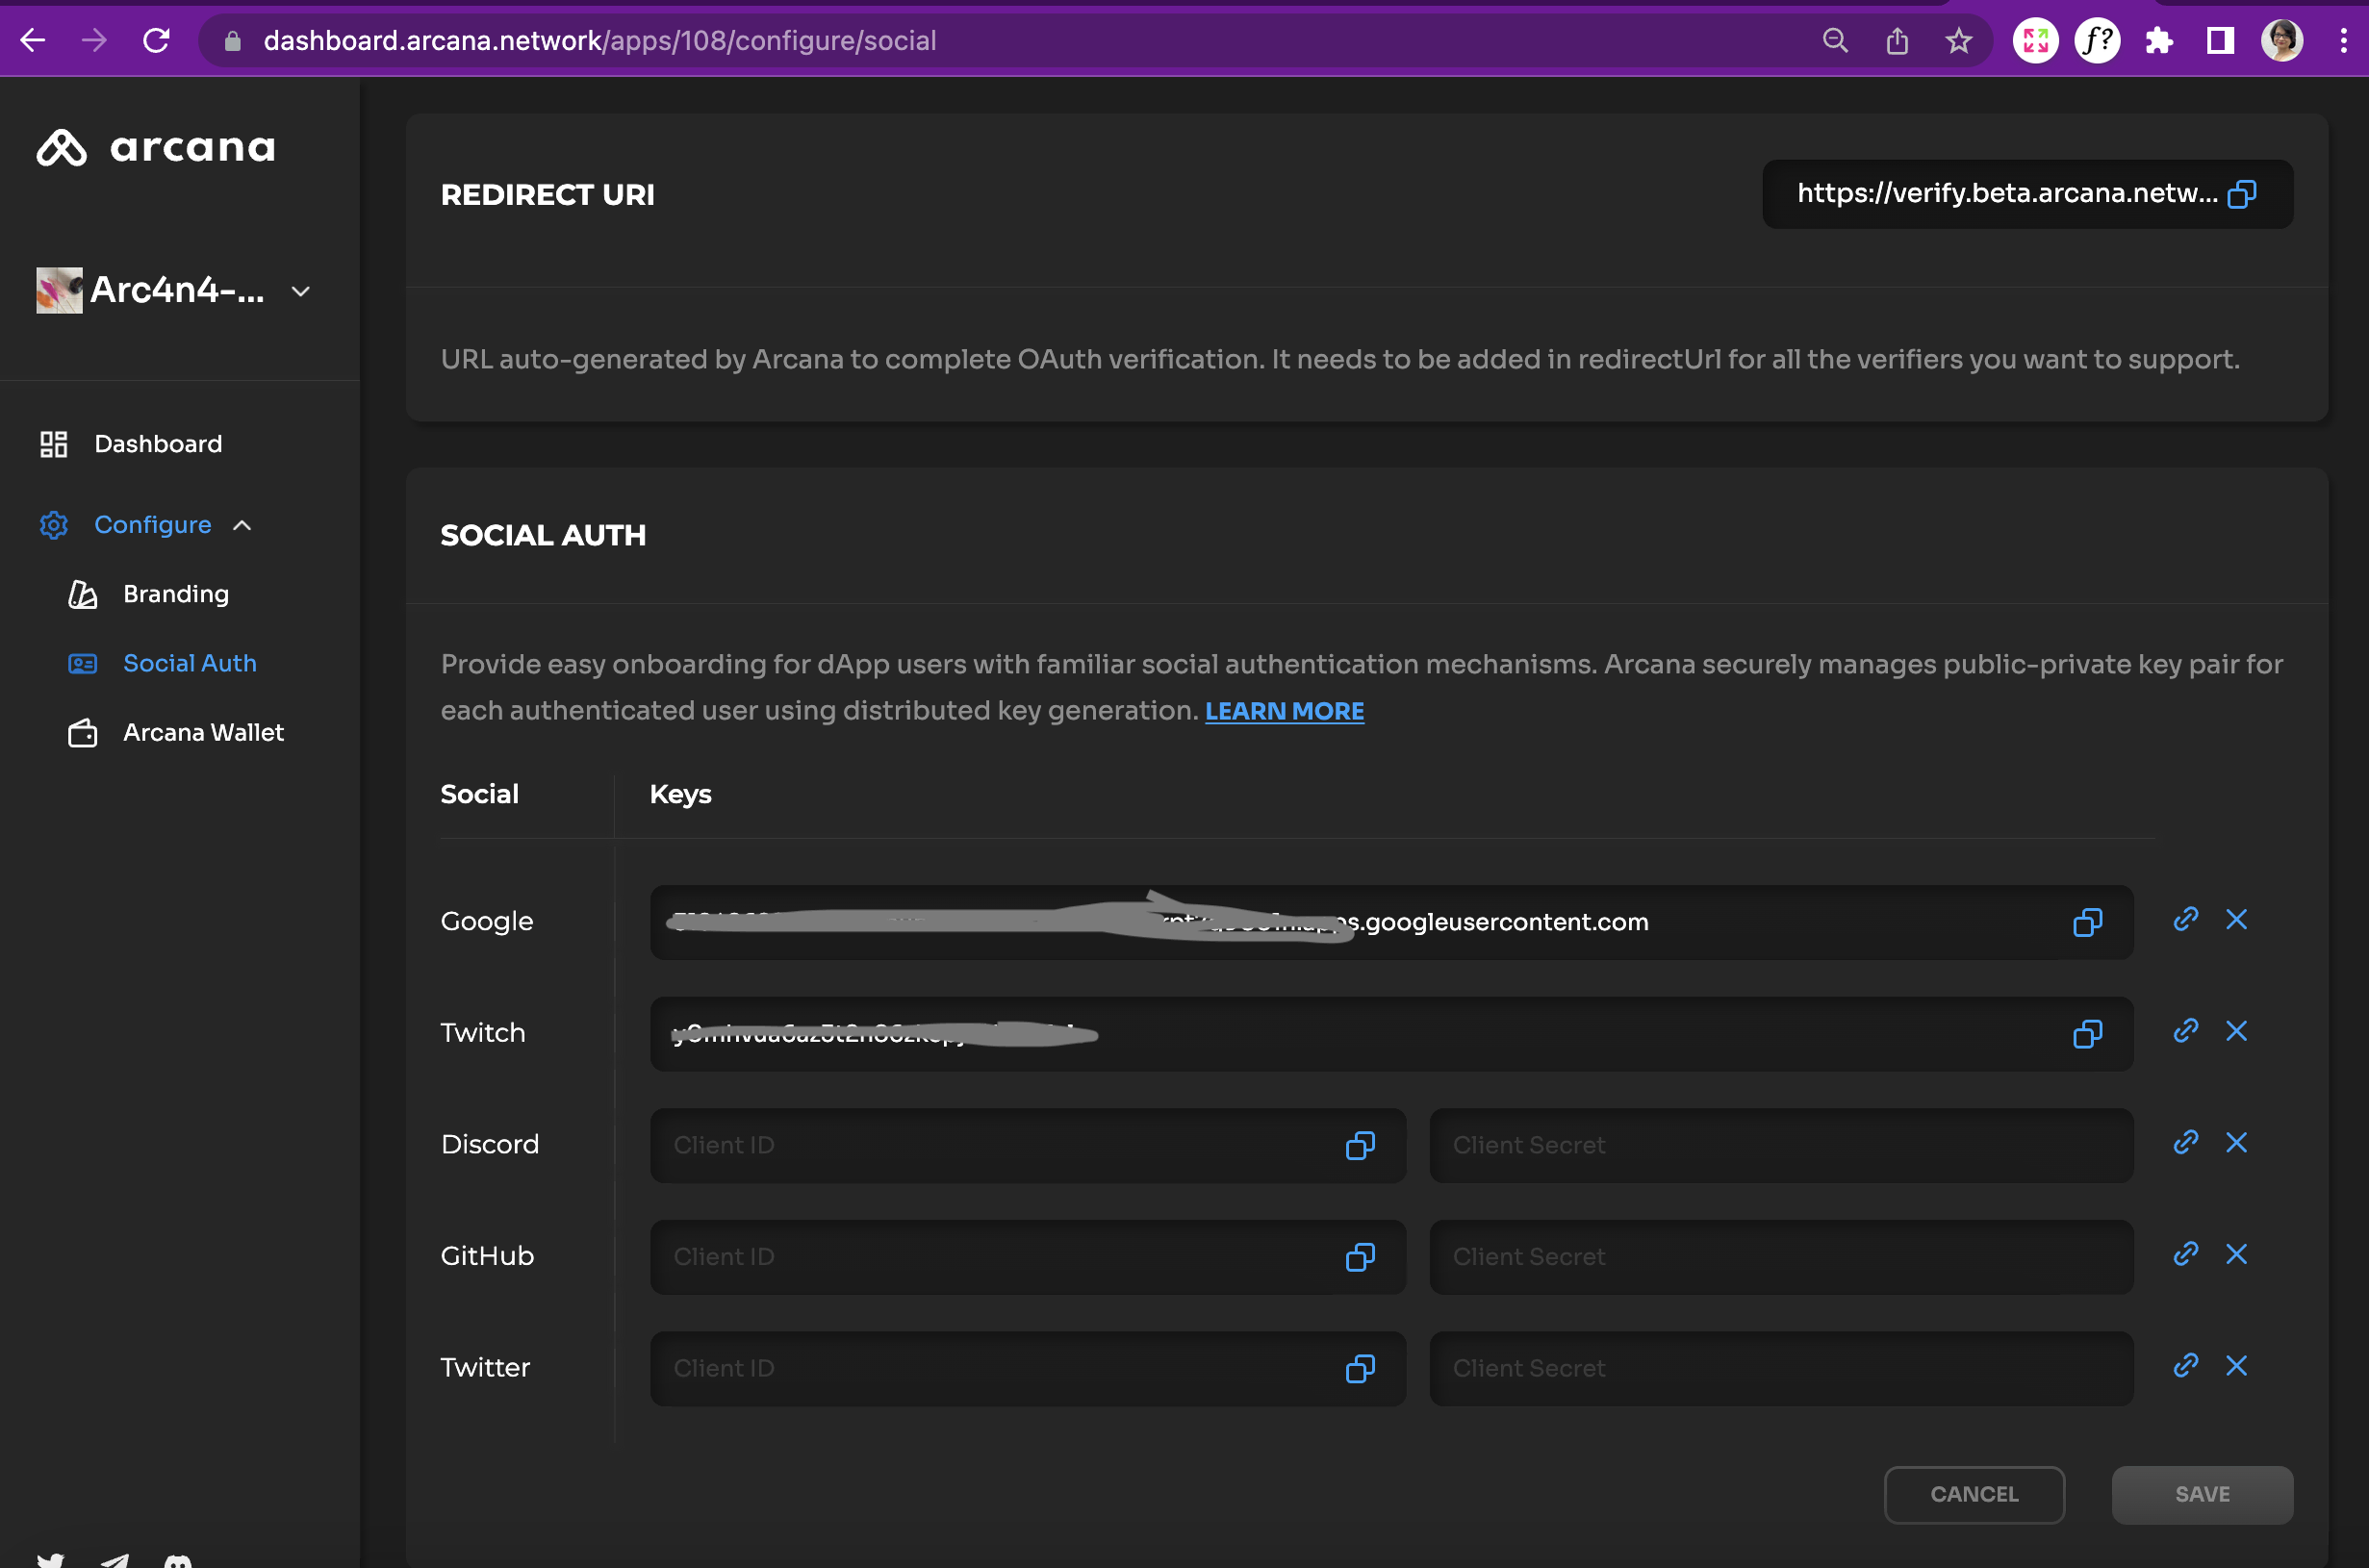 Use Dashboard to configure Google, Twitch social login